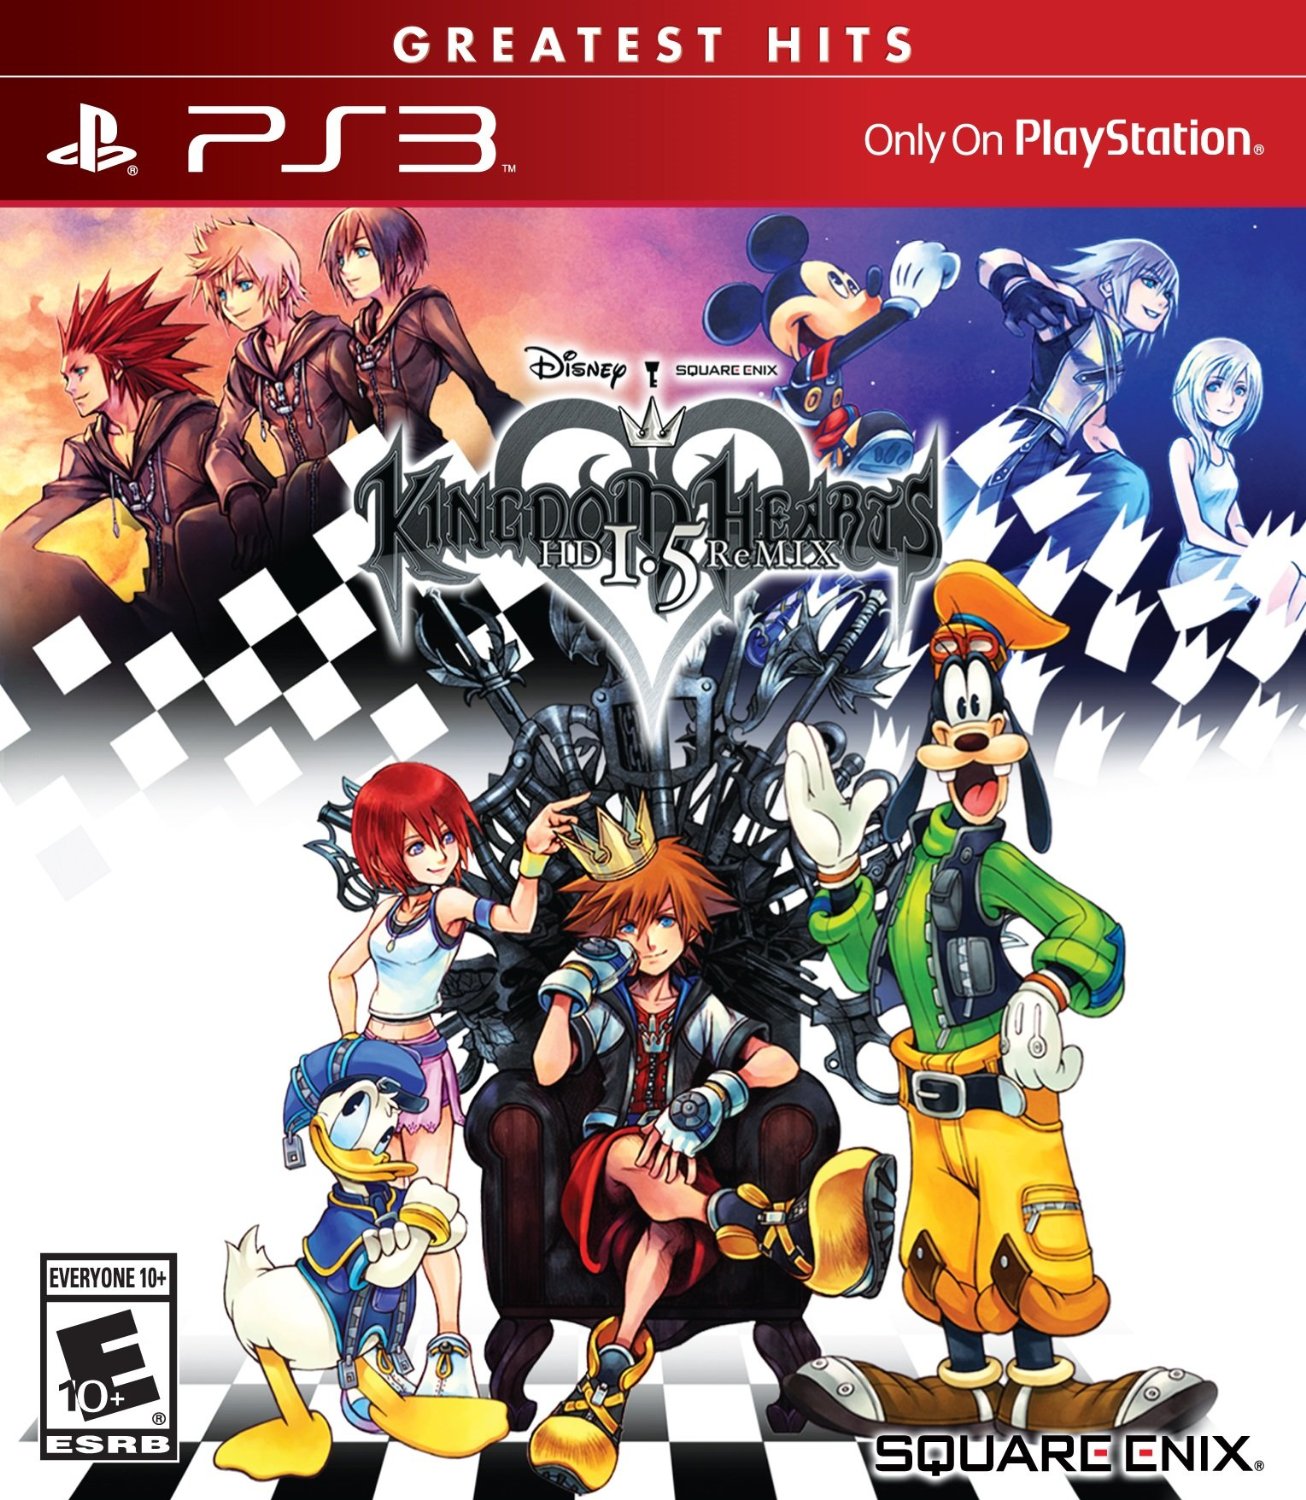 kingdom-hearts-hd-1-5-remix-is-now-one-of-ps3-s-greatest-hits-news-kingdom-hearts-insider